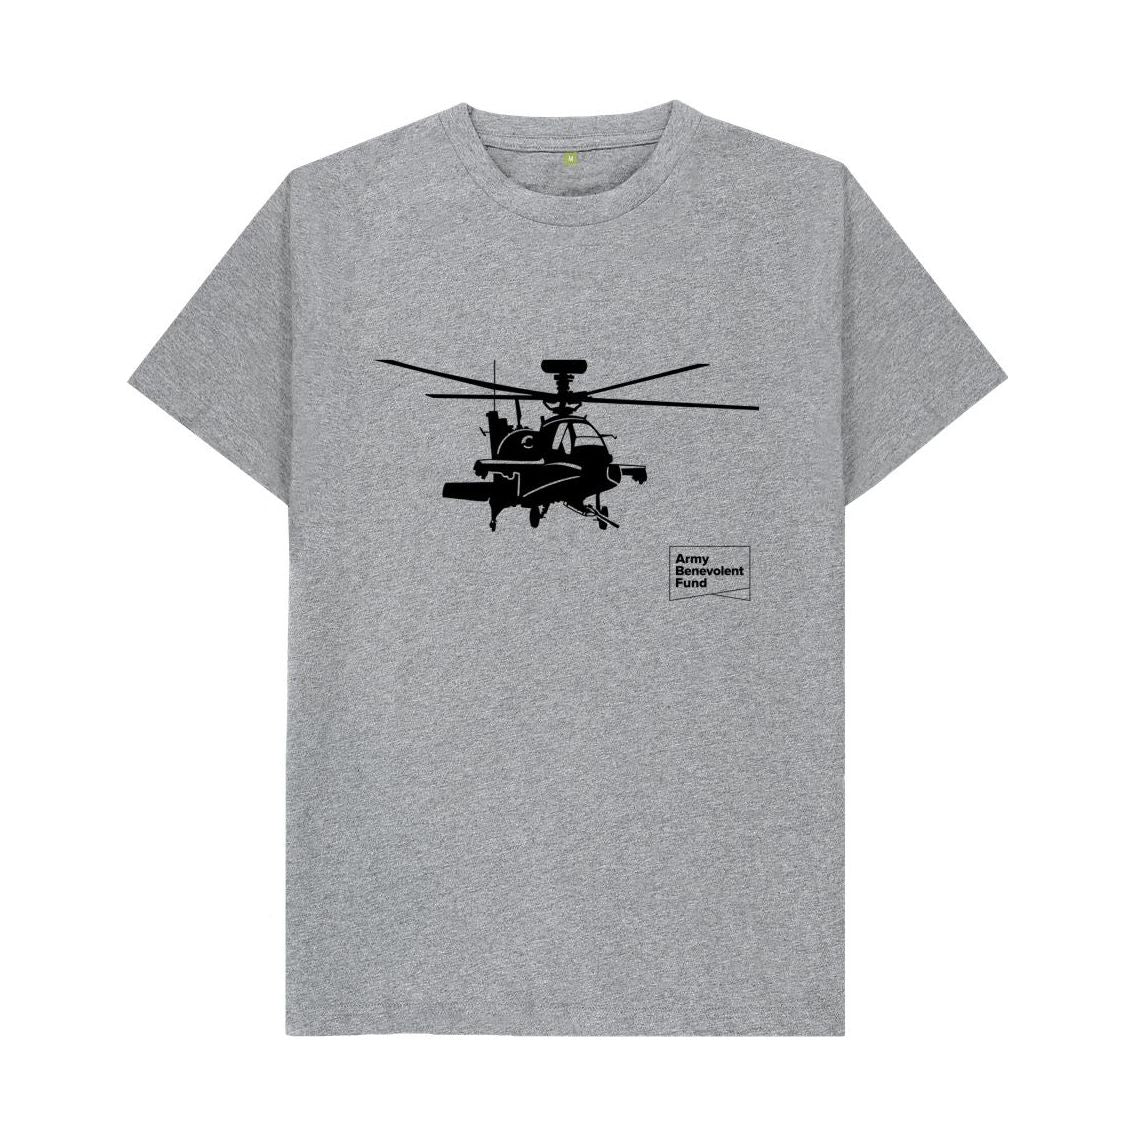 Athletic Grey Helicopter Silhouette T-shirt